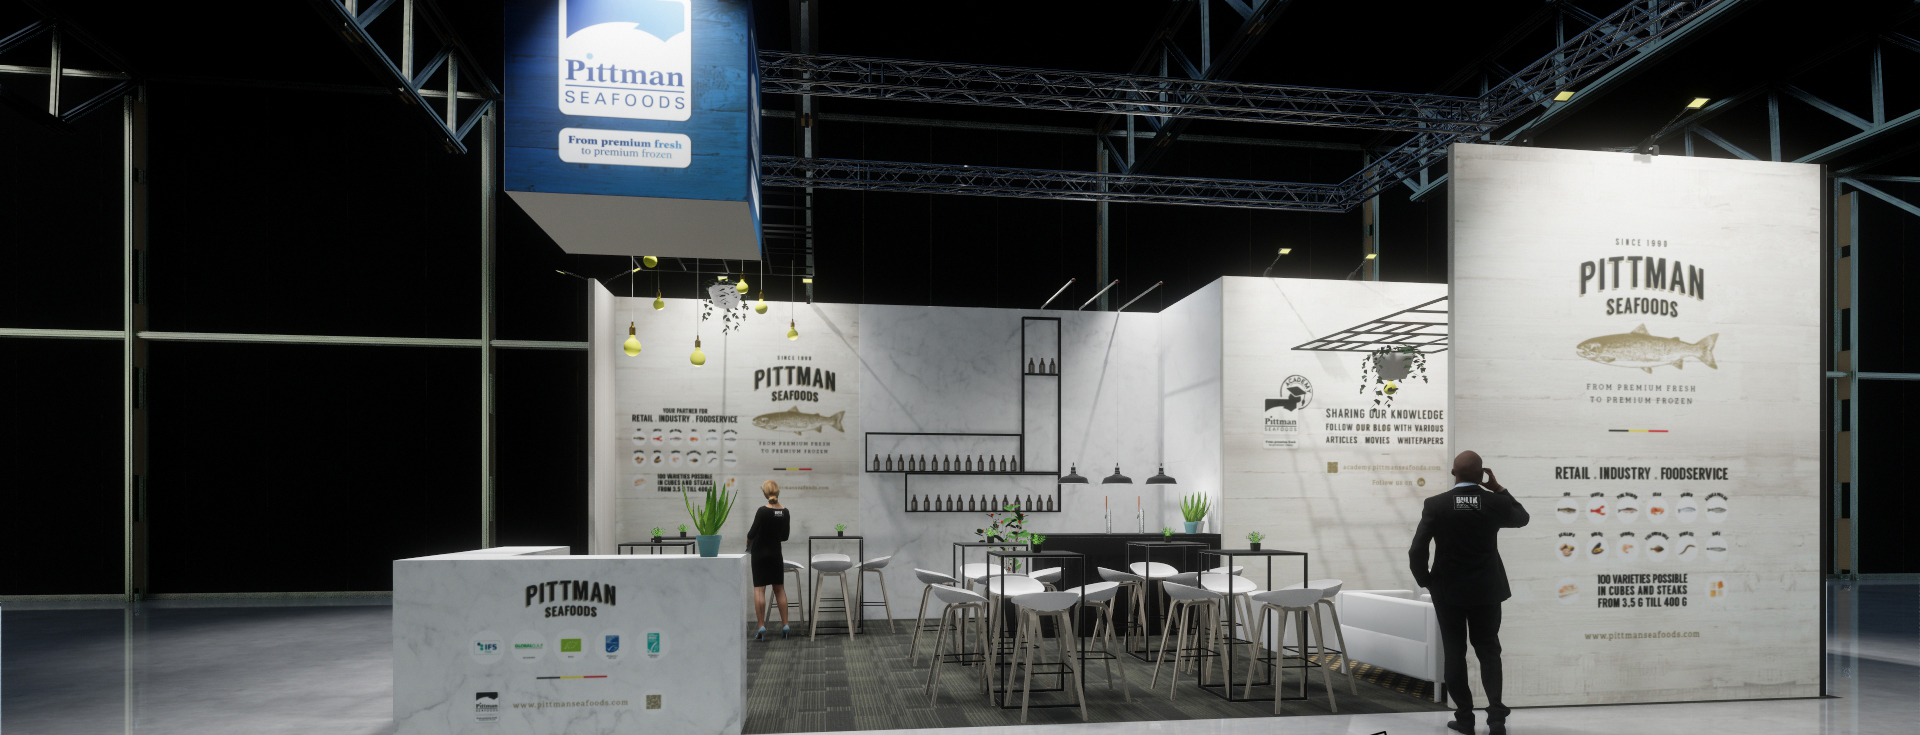 Pittman Seafoods – long-term supporter of the world’s biggest seafood expo